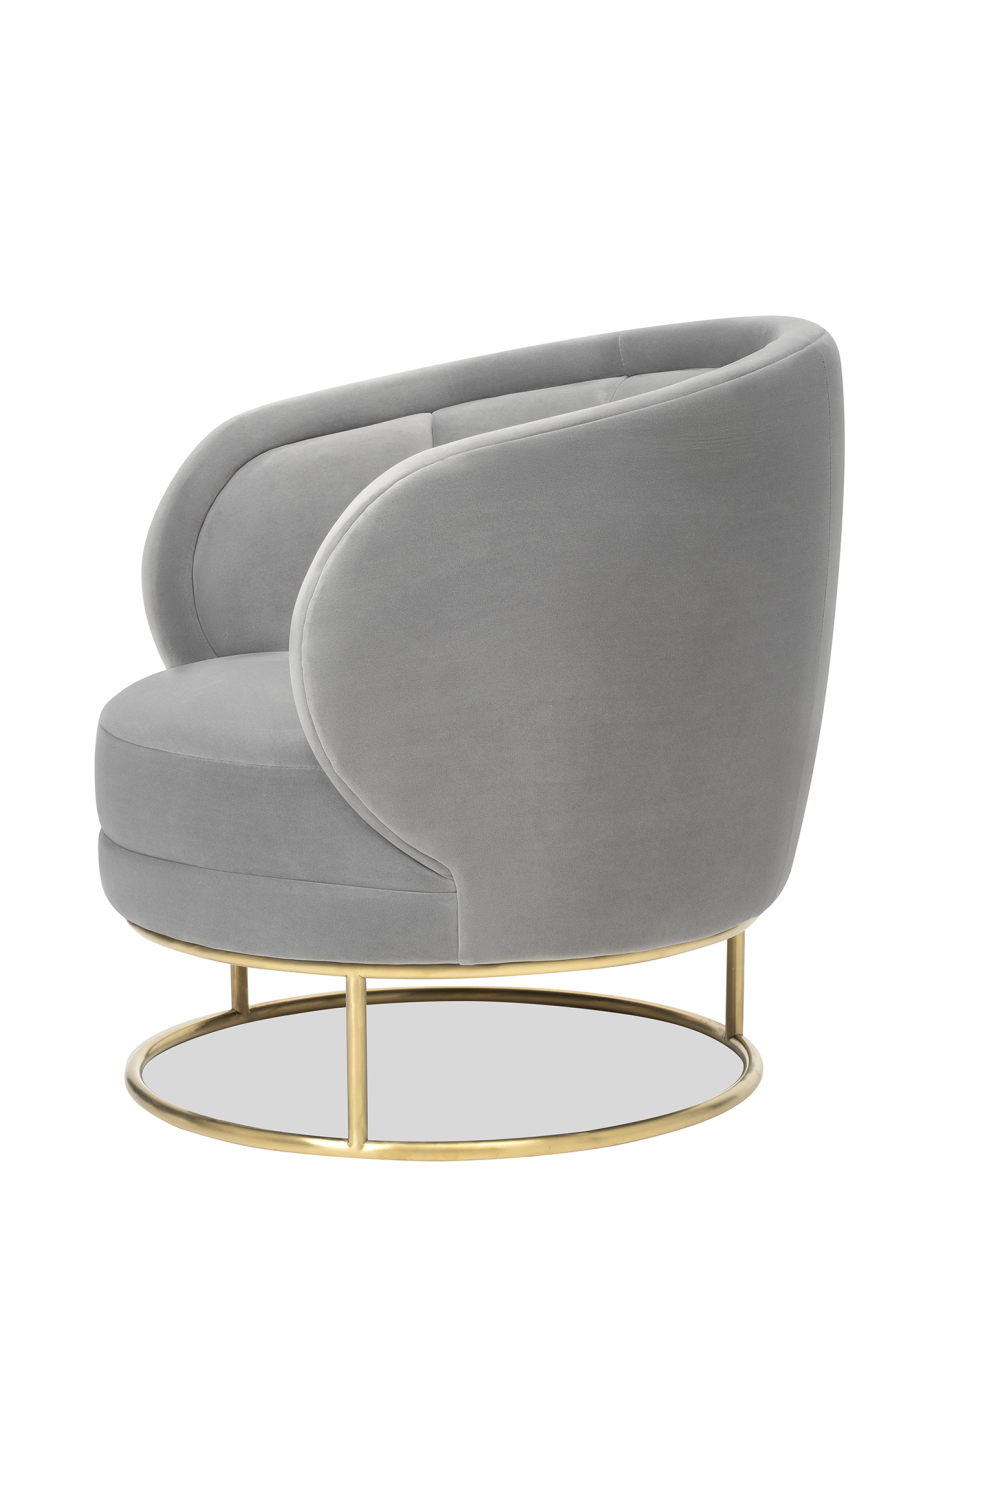 Rounded Back Accent Chair | Liang & Eimil Mila | OROA.com